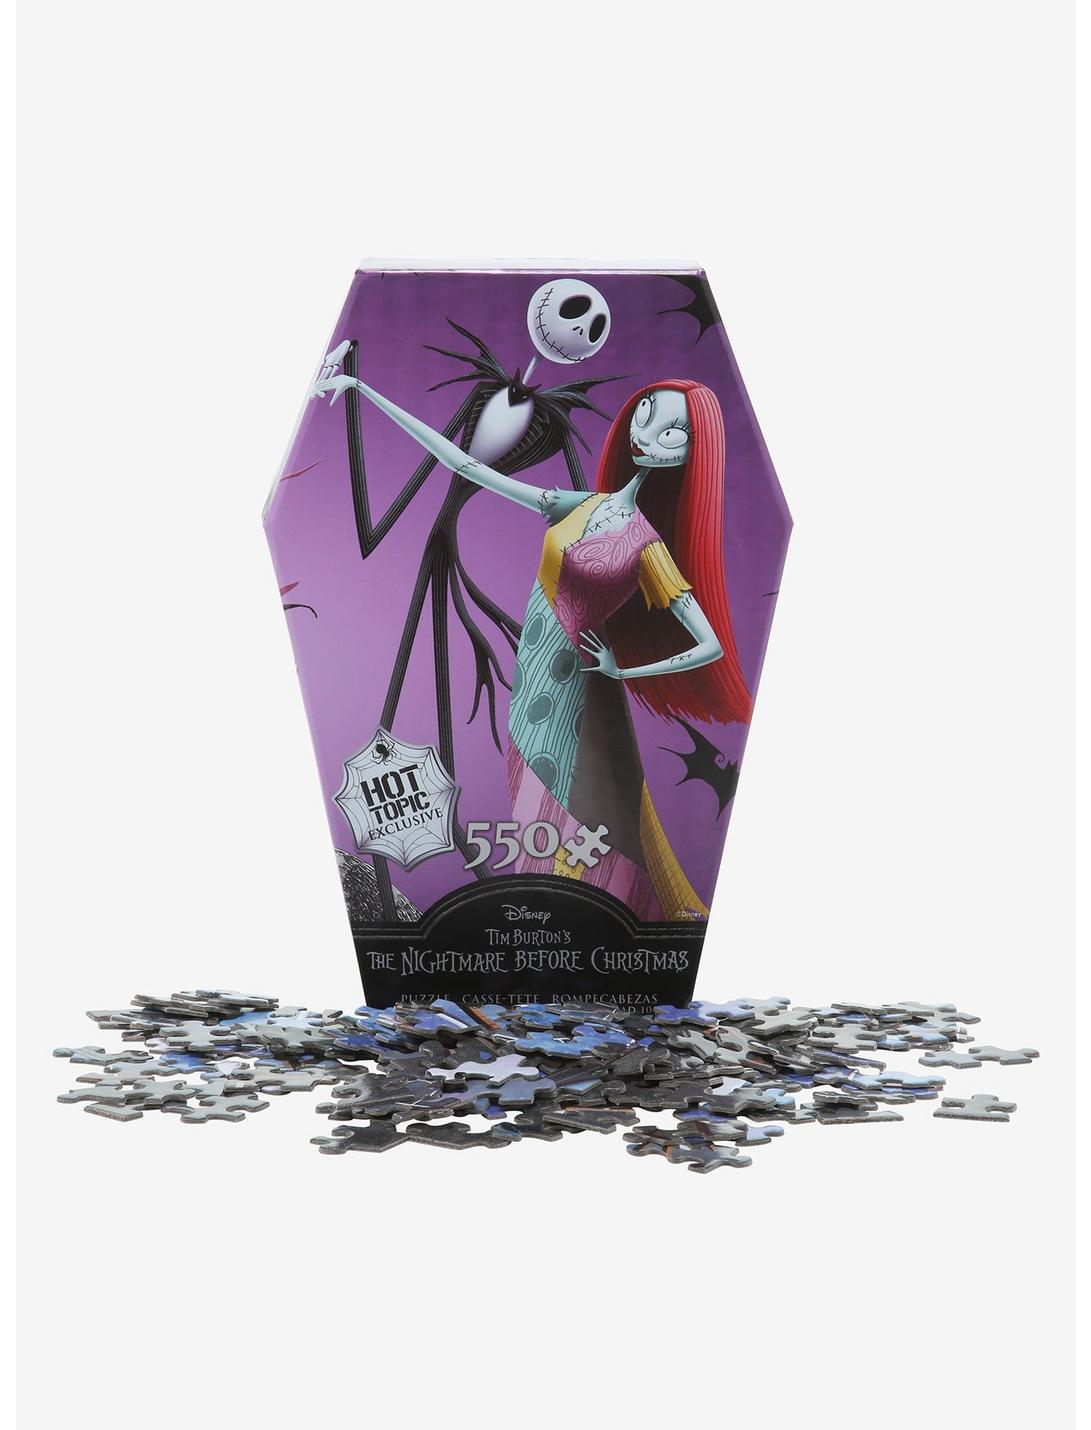 The Nightmare Before Christmas Purple Scene Puzzle Hot Topic Exclusive, , hi-res